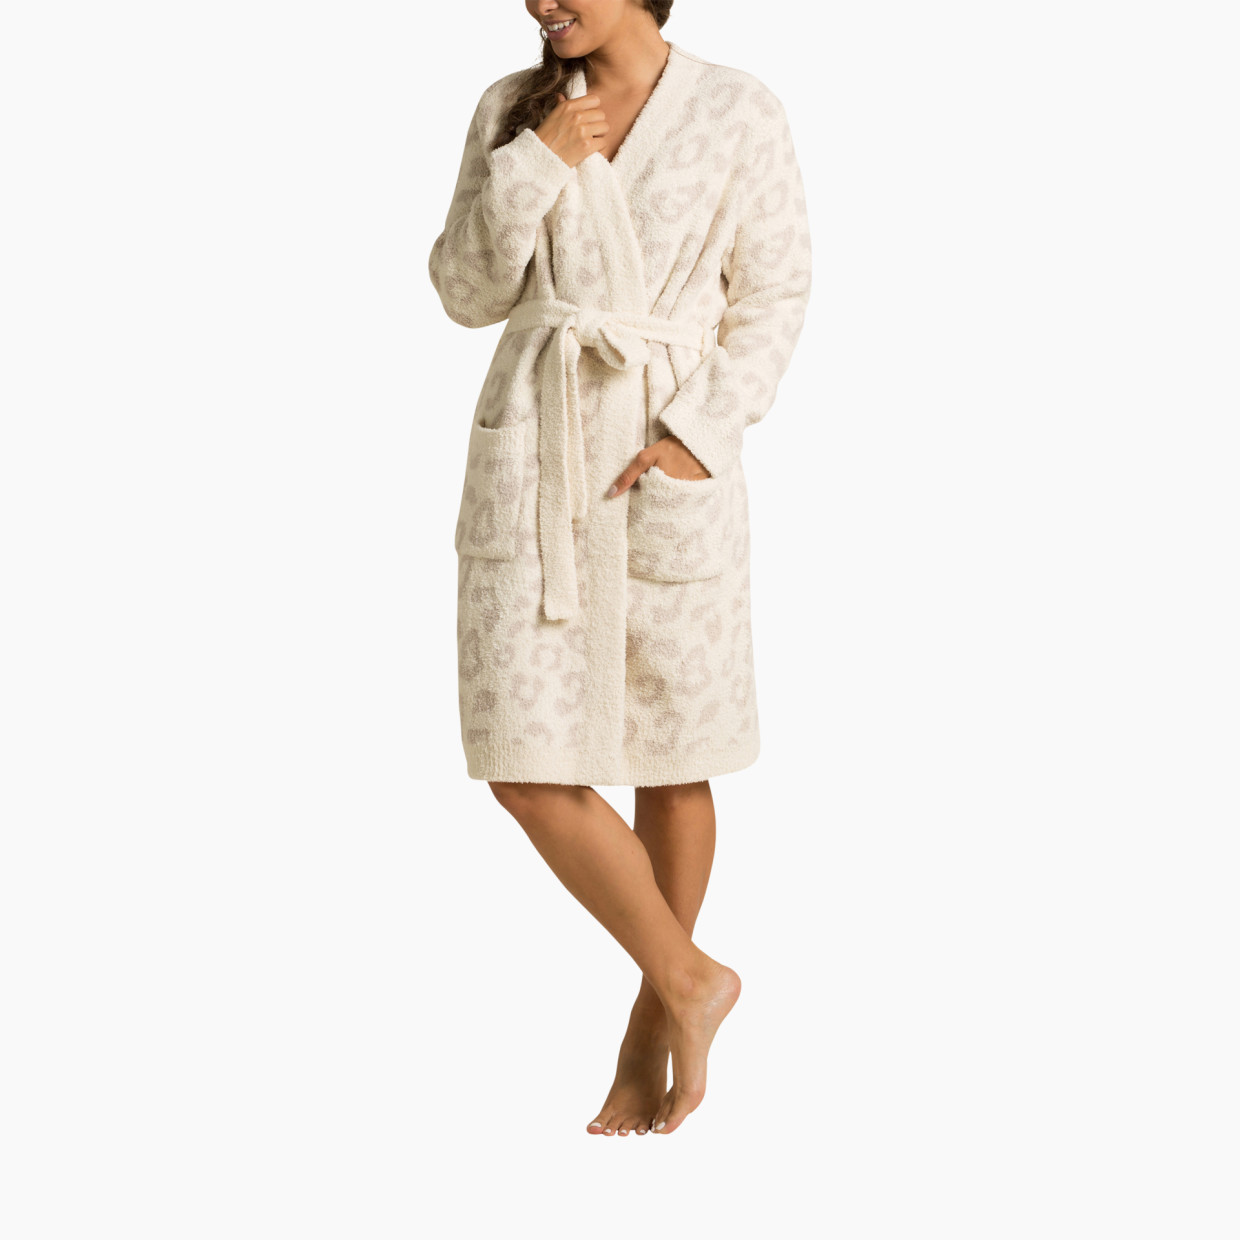 Barefoot Dreams CozyChic Barefoot In The Wild Robe - Cream/Stone, Xl.